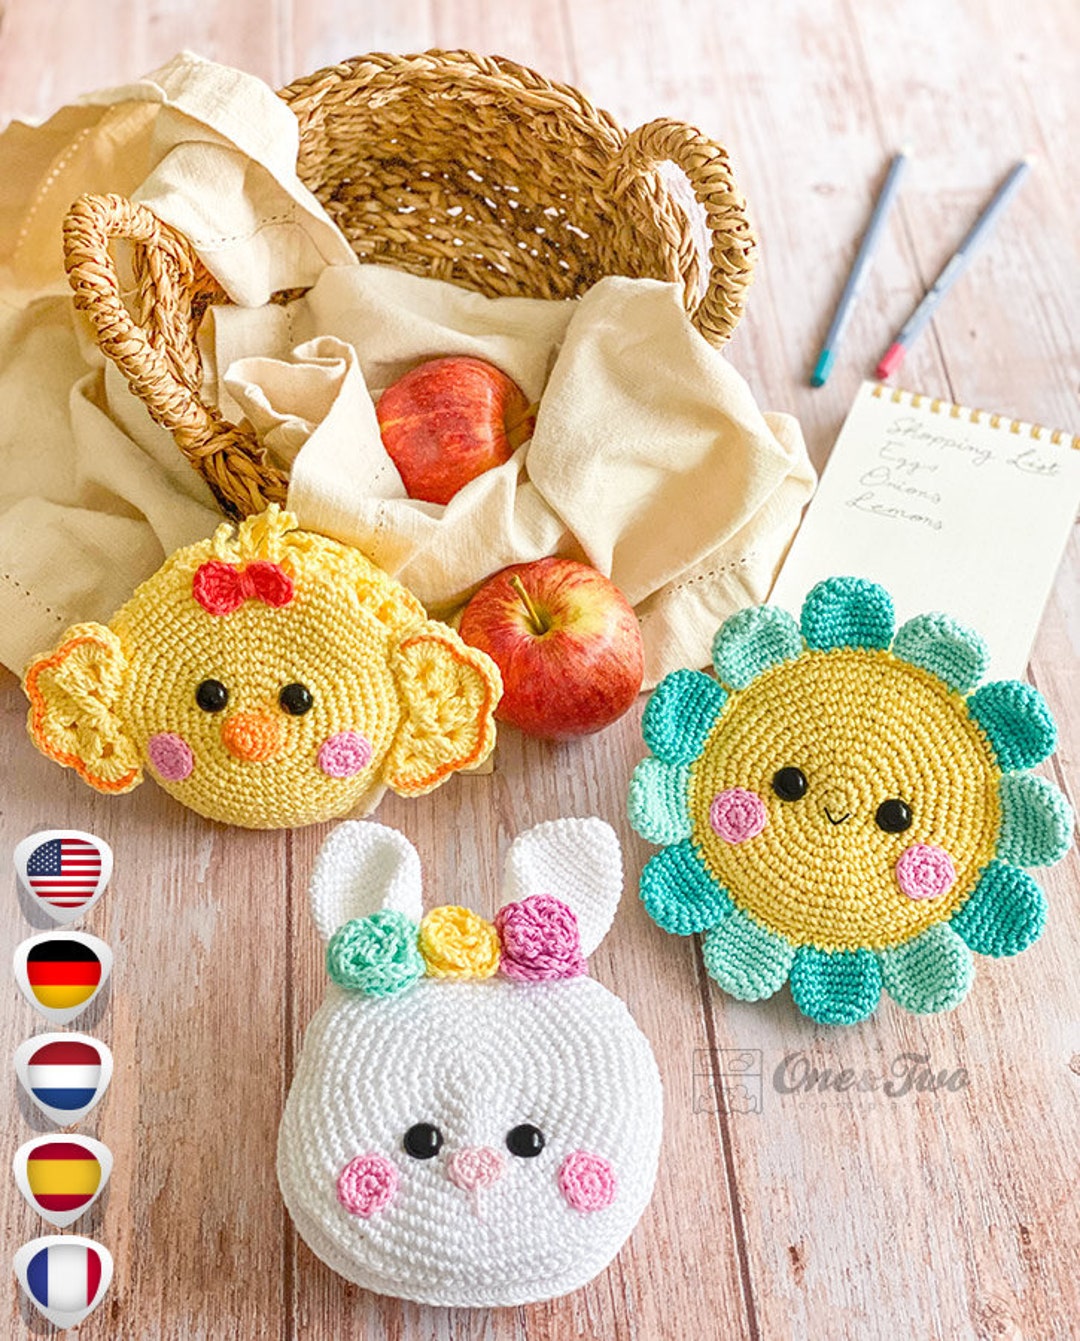 Portable Crochet Bag Small Zipper Closure with Handle Tote Gift Holder Case  Yarn Deer 